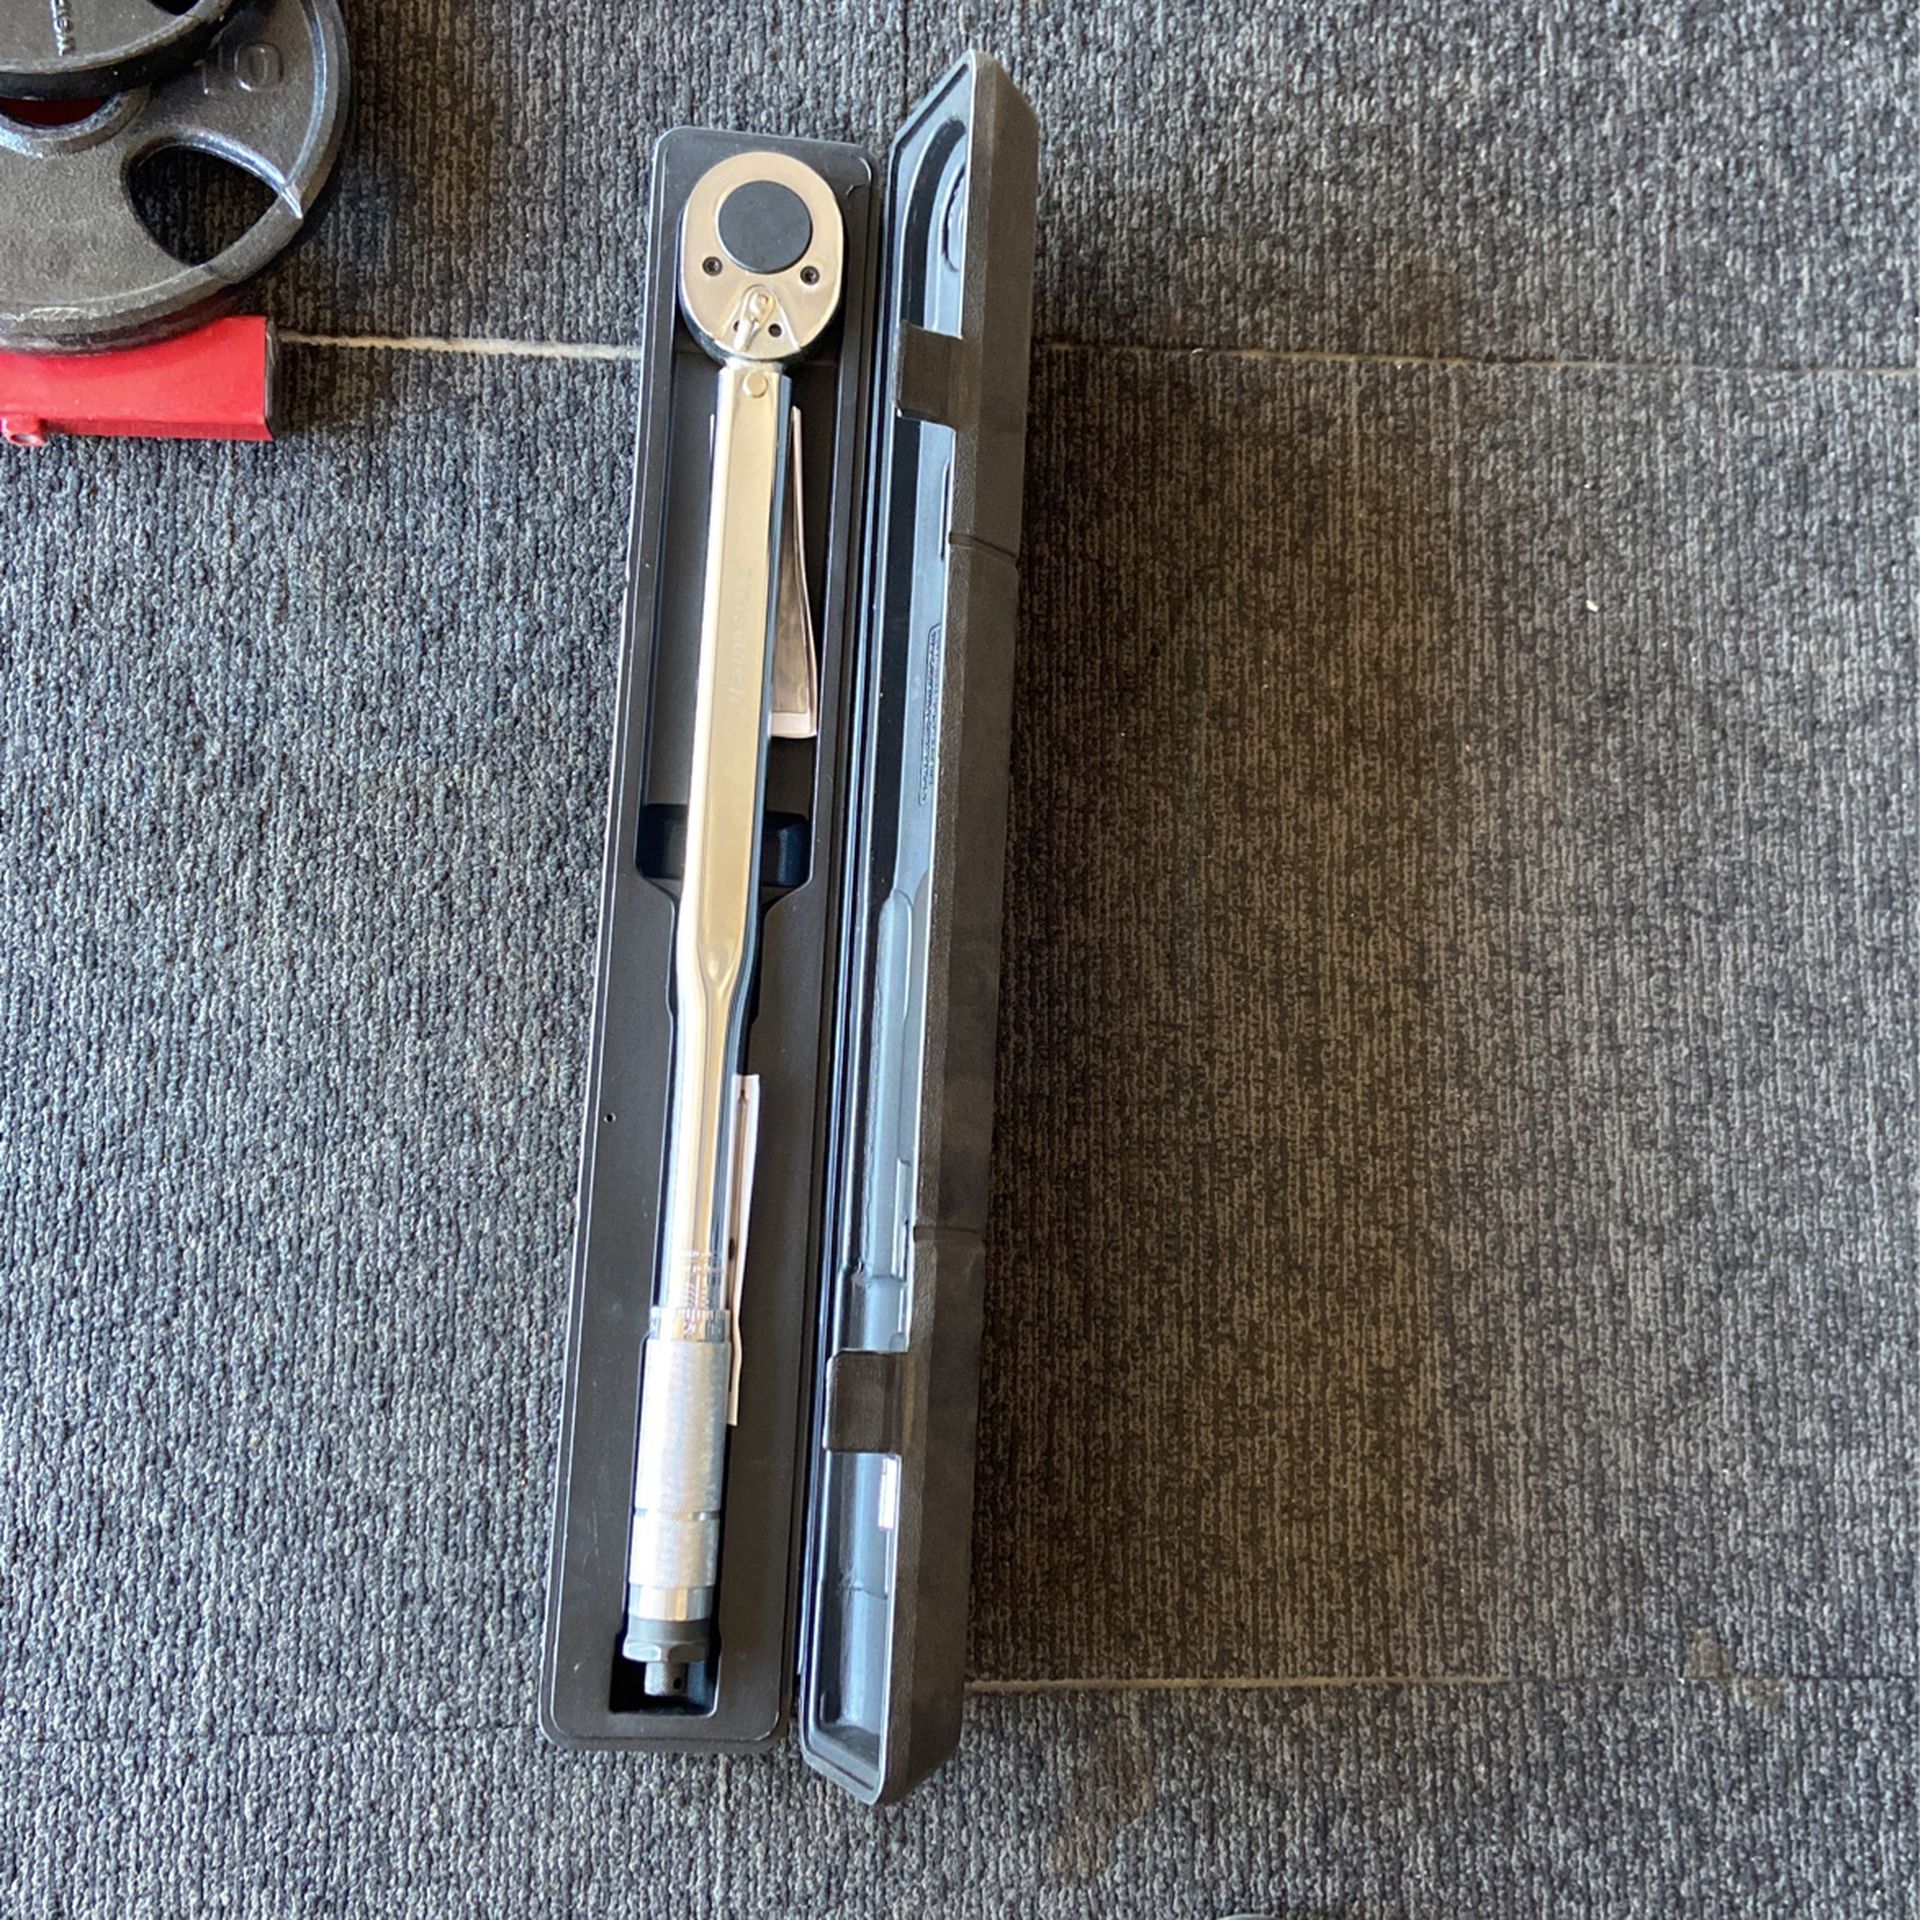 3/4 Torque Wrench 